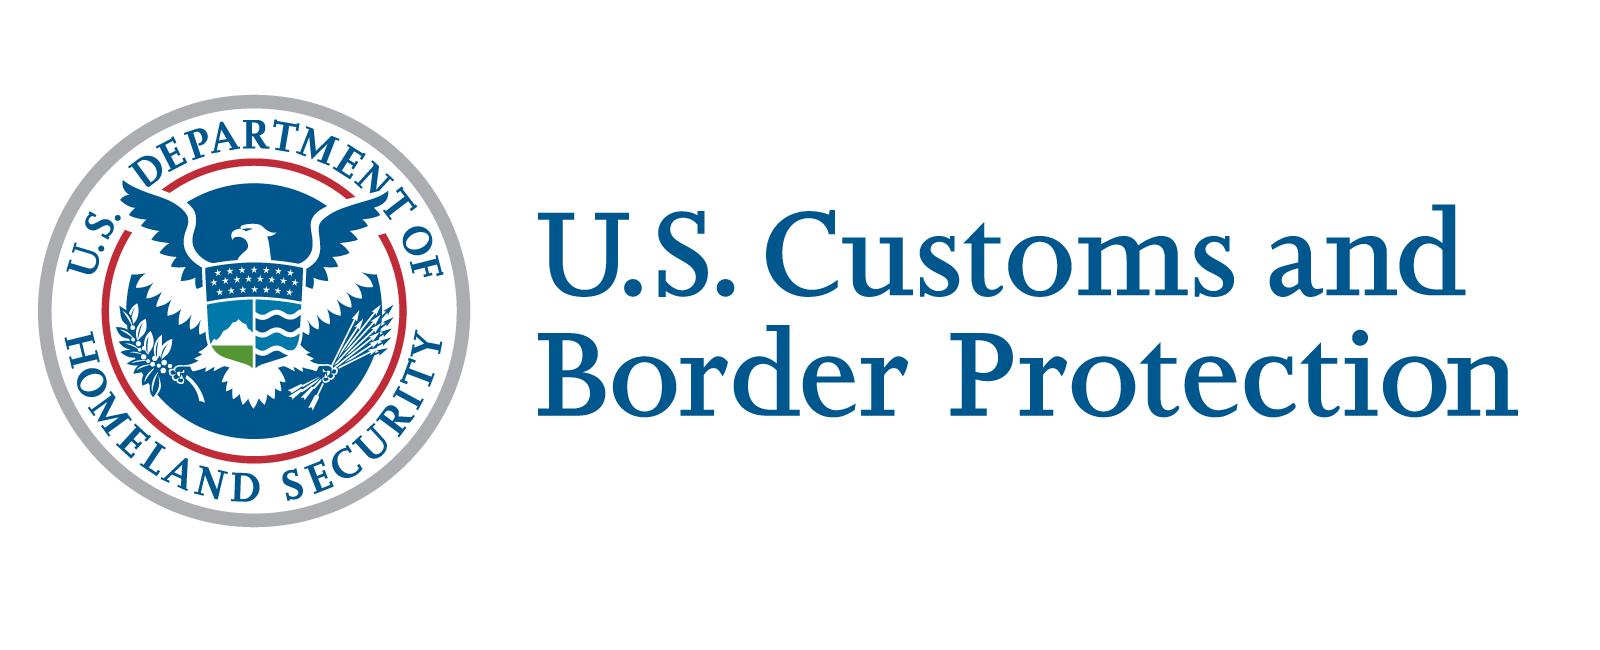 Customs and Border Protection Logo - 18F: Digital service delivery | How the U.S. Customs and Border ...